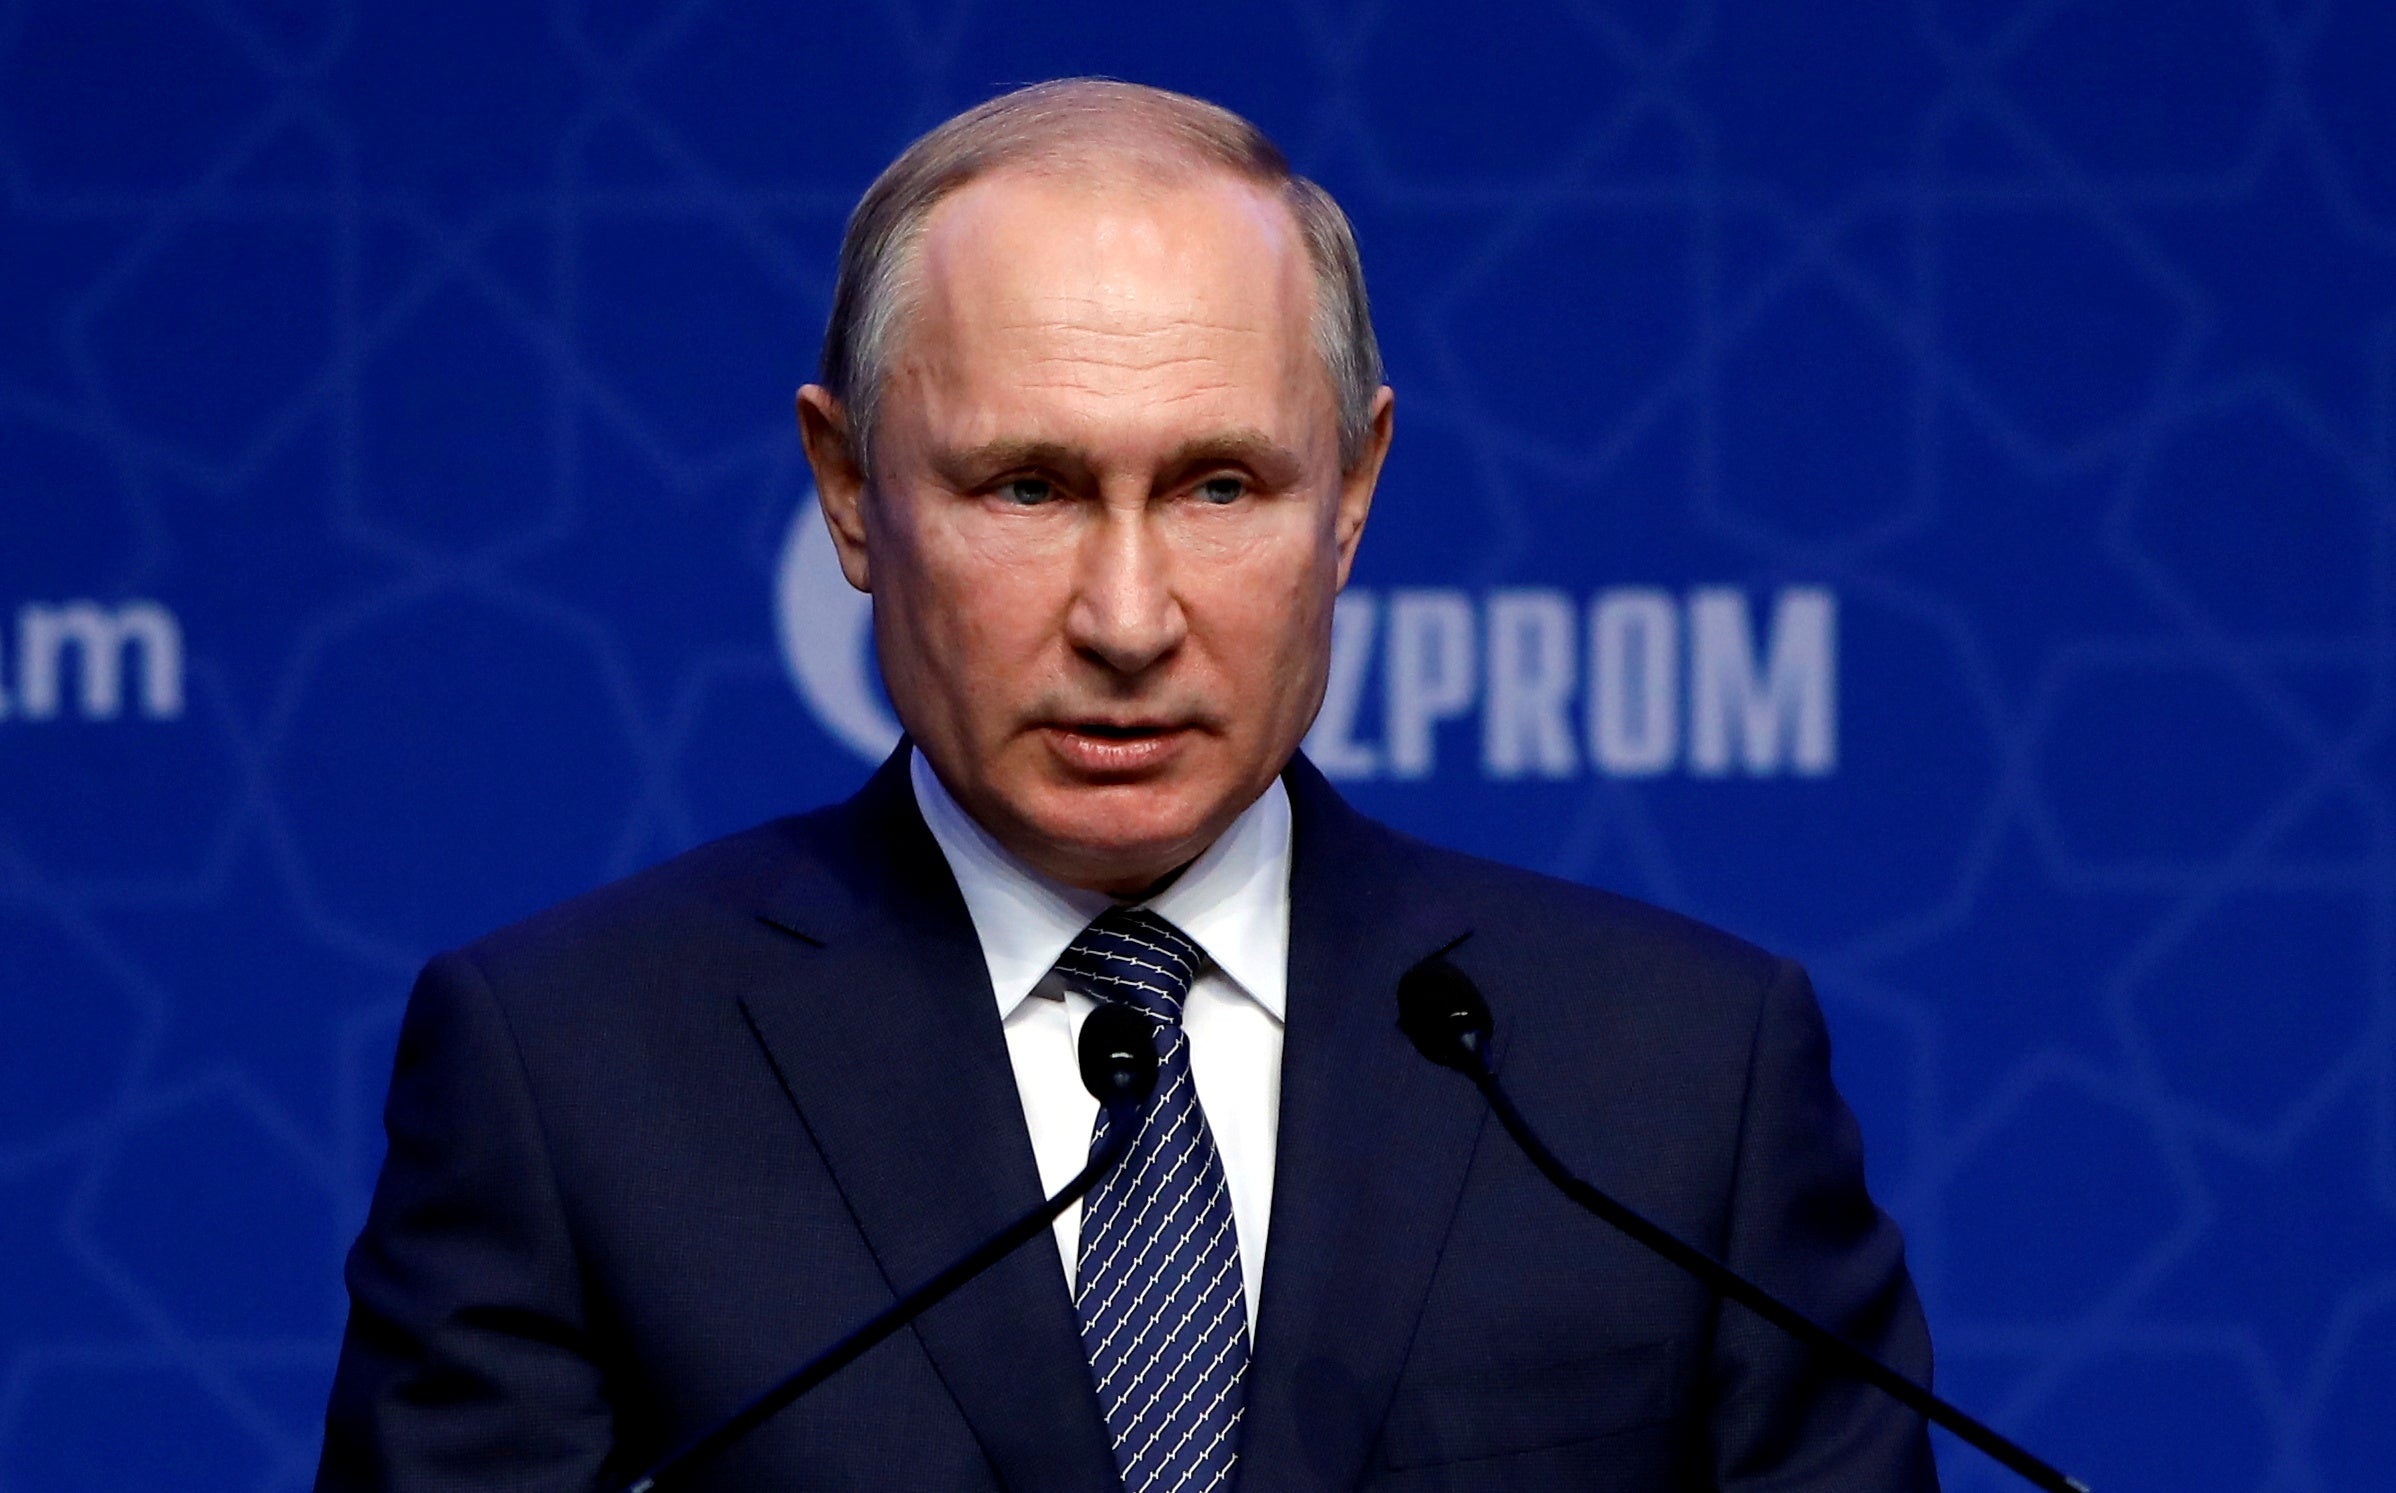 The Russian president, Vladimir Putin, insists gas is not being weaponised